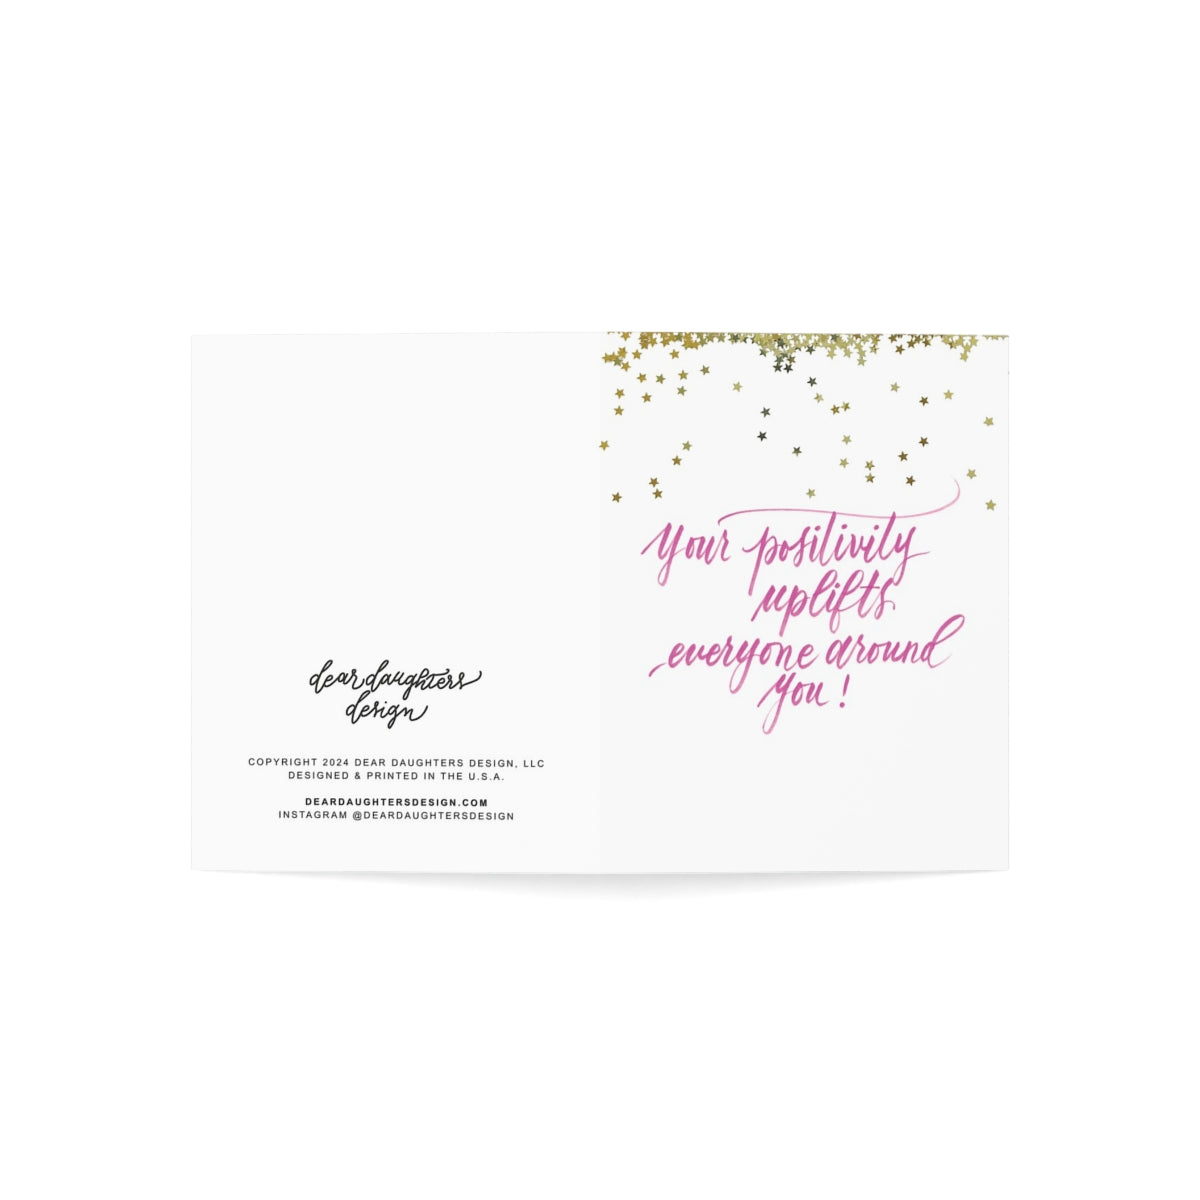 "Your positivity uplifts everyone around you!" Pink Thank You Greeting Card - Gratitude #11